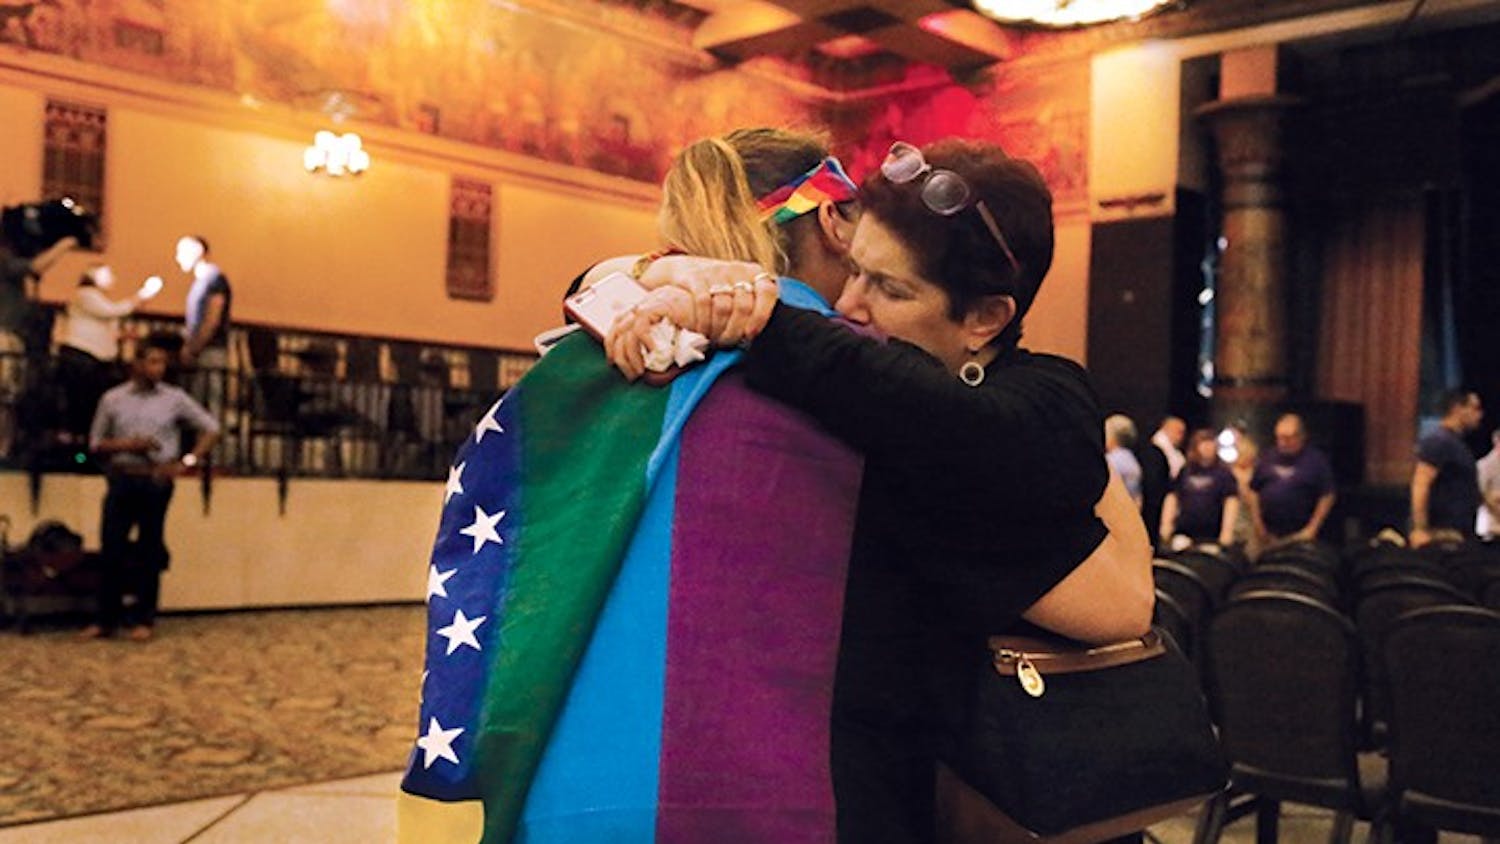 Kim Saylor, left, hugs Annette Gross, right, after the end of a vigil, which took place in the Egyptian Room at the Old National Centre Sunday evening and was sponsored by Indy Pride in response to the recent mass shooting that took place at a gay night club in Orlando, Florida. "I wouldn't have been anywhere but here today," Saylor said. "The hate has got to end." 